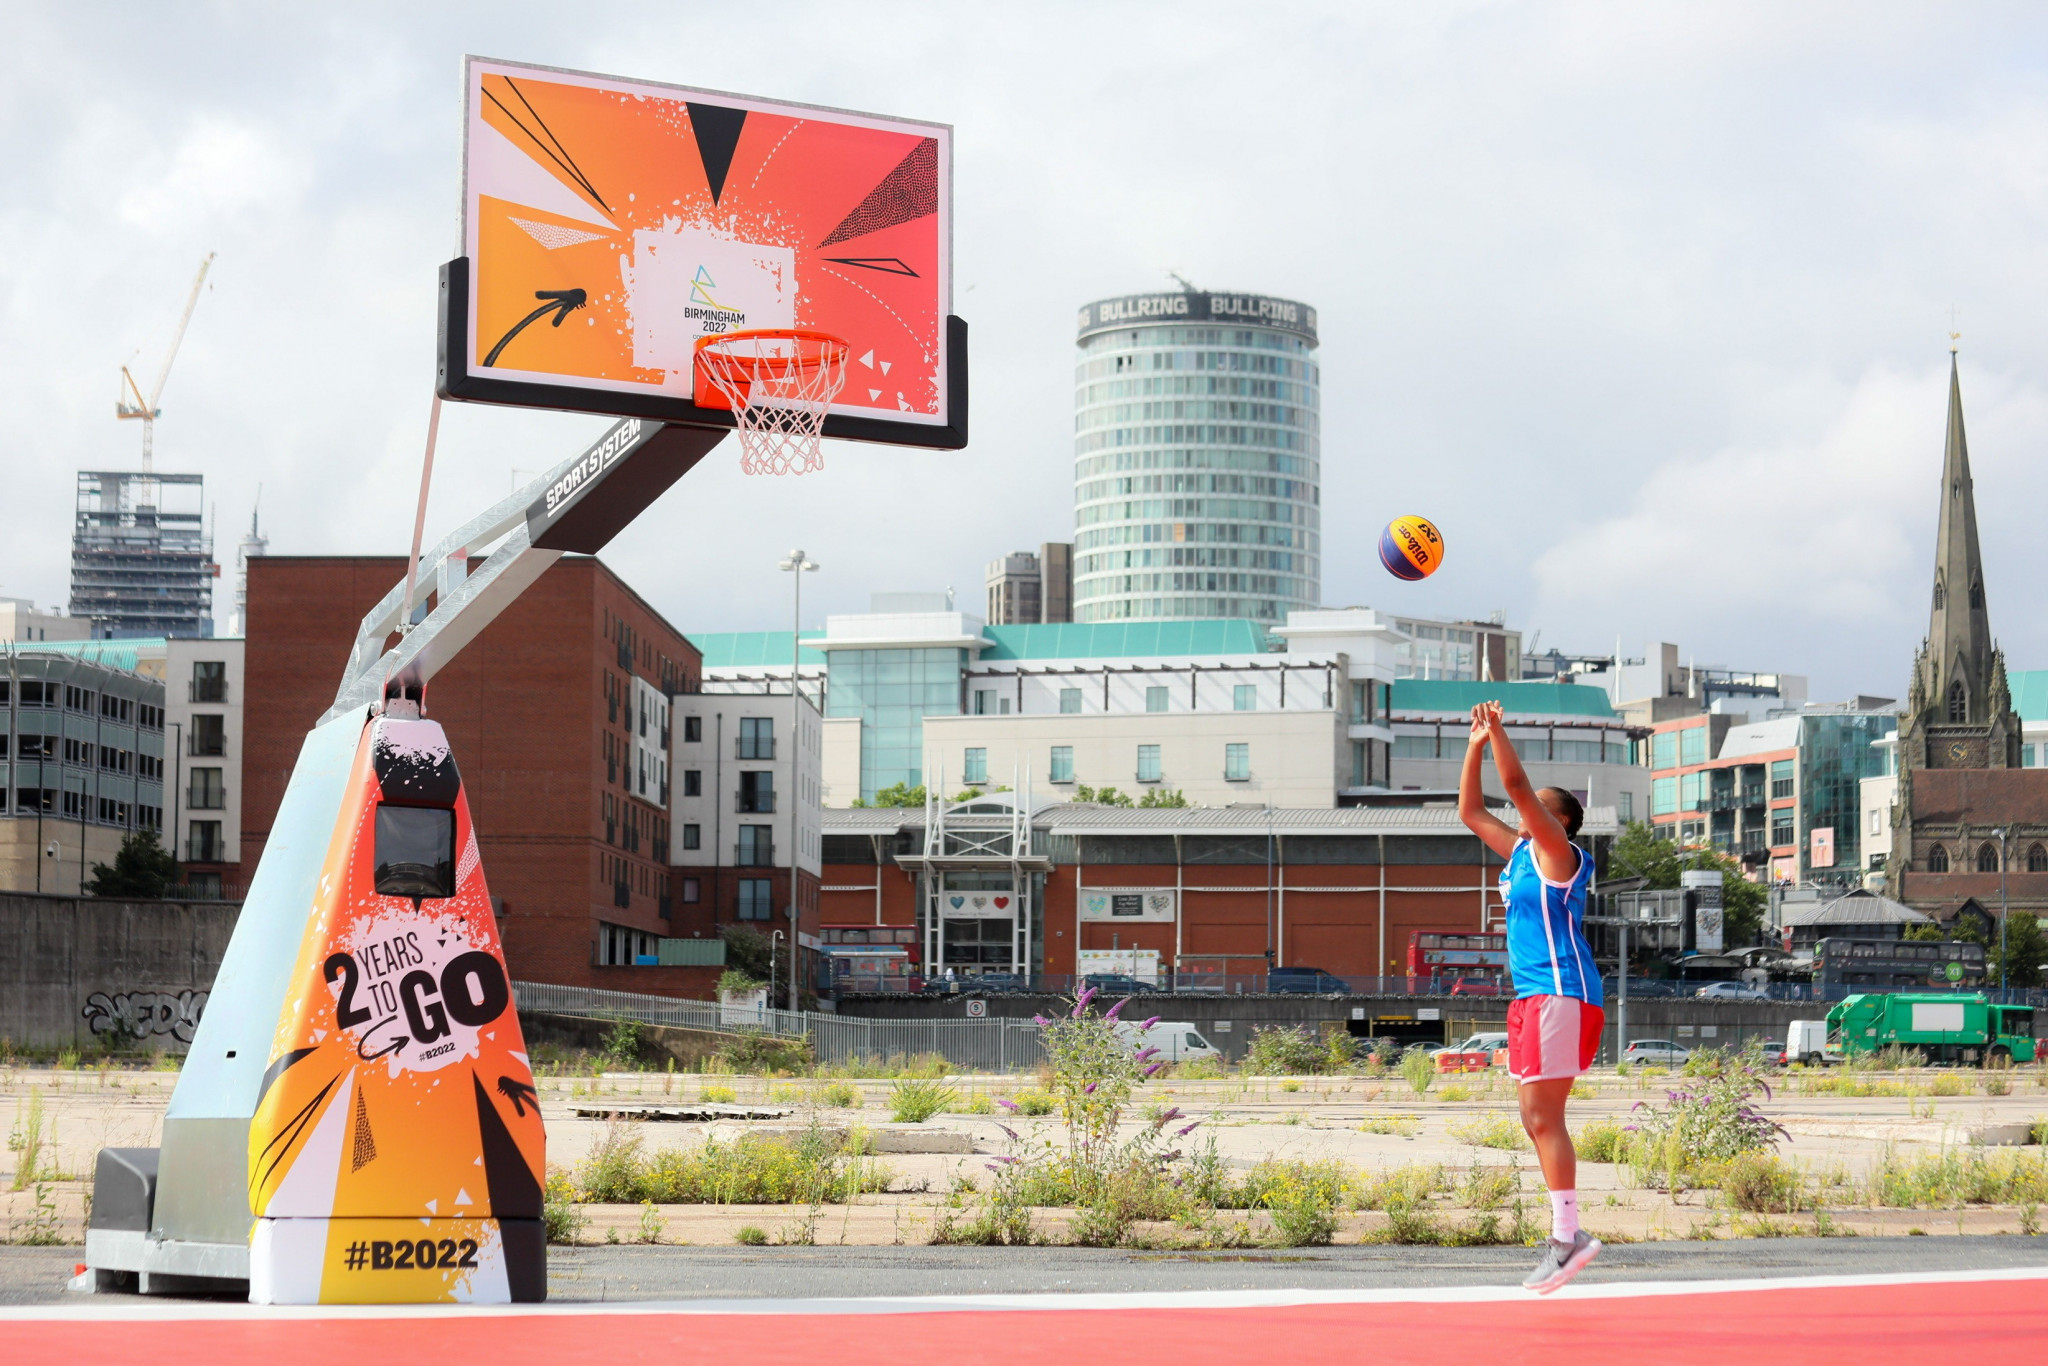 Birmingham 2022 unveiled the location for the 3x3 basketball and beach volleyball venues to mark two-years-to-go ©Birmingham 2022